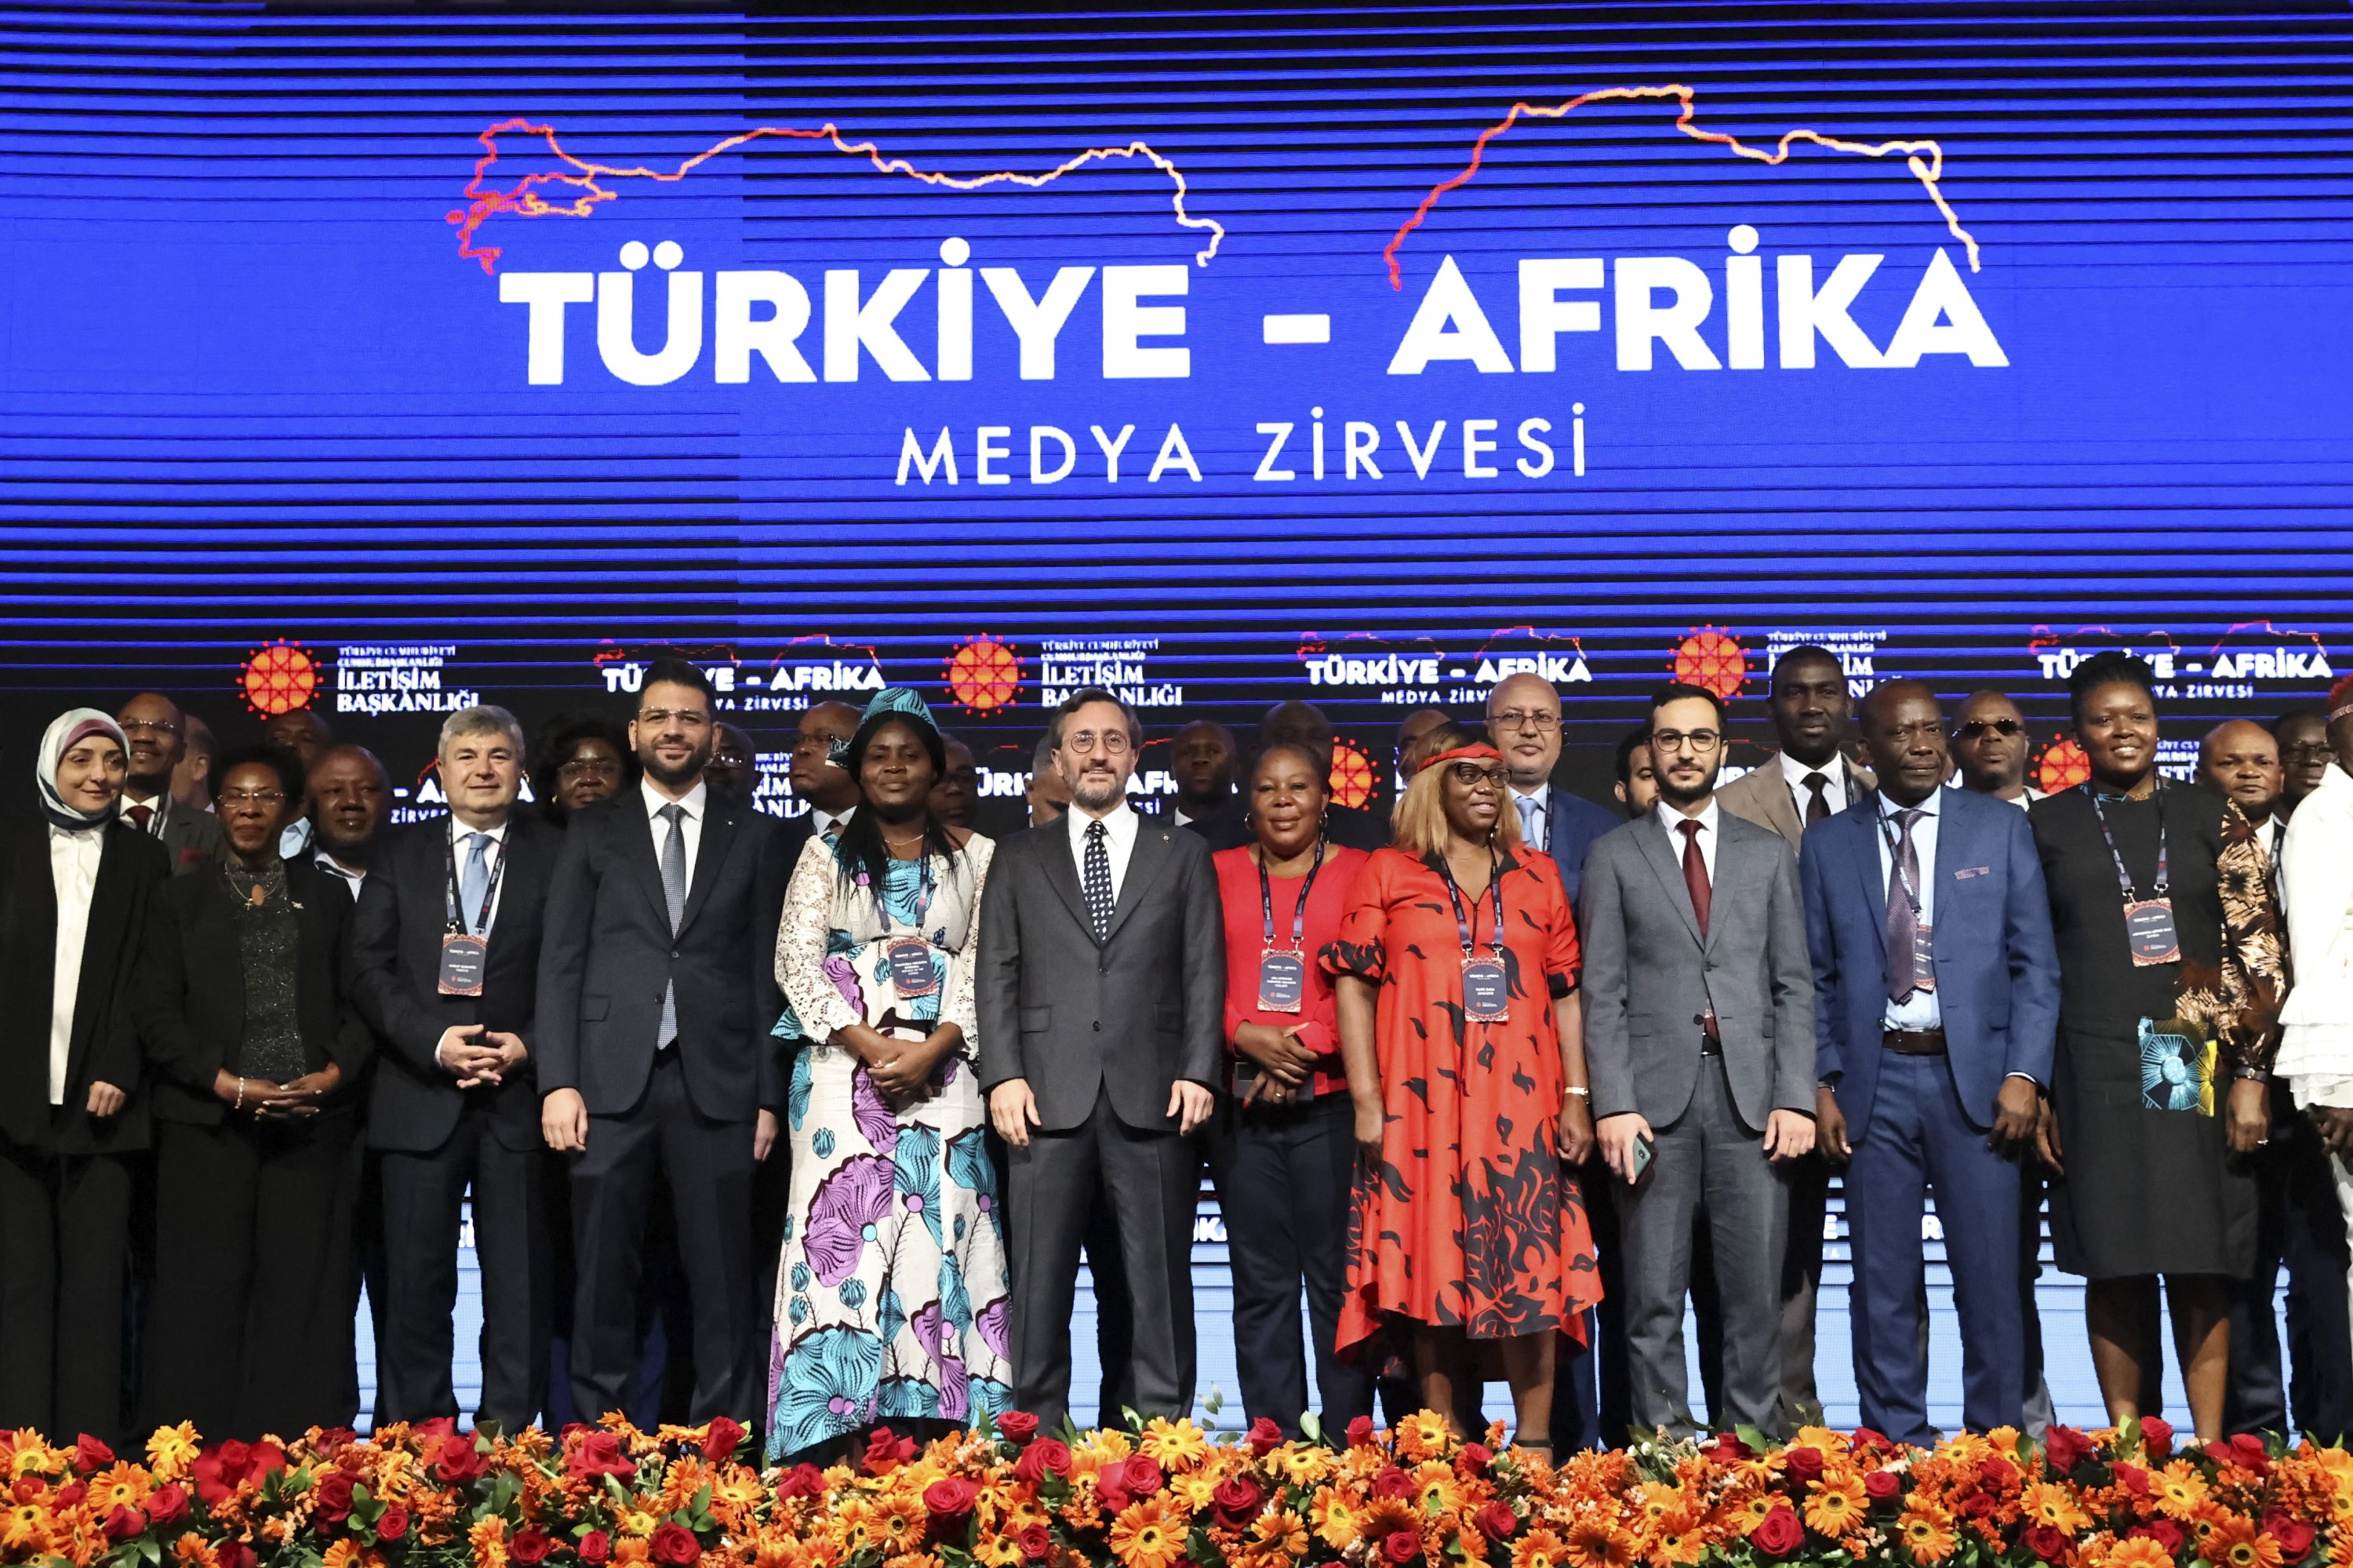 Media summit in Istanbul brings together African, Turkish journalists